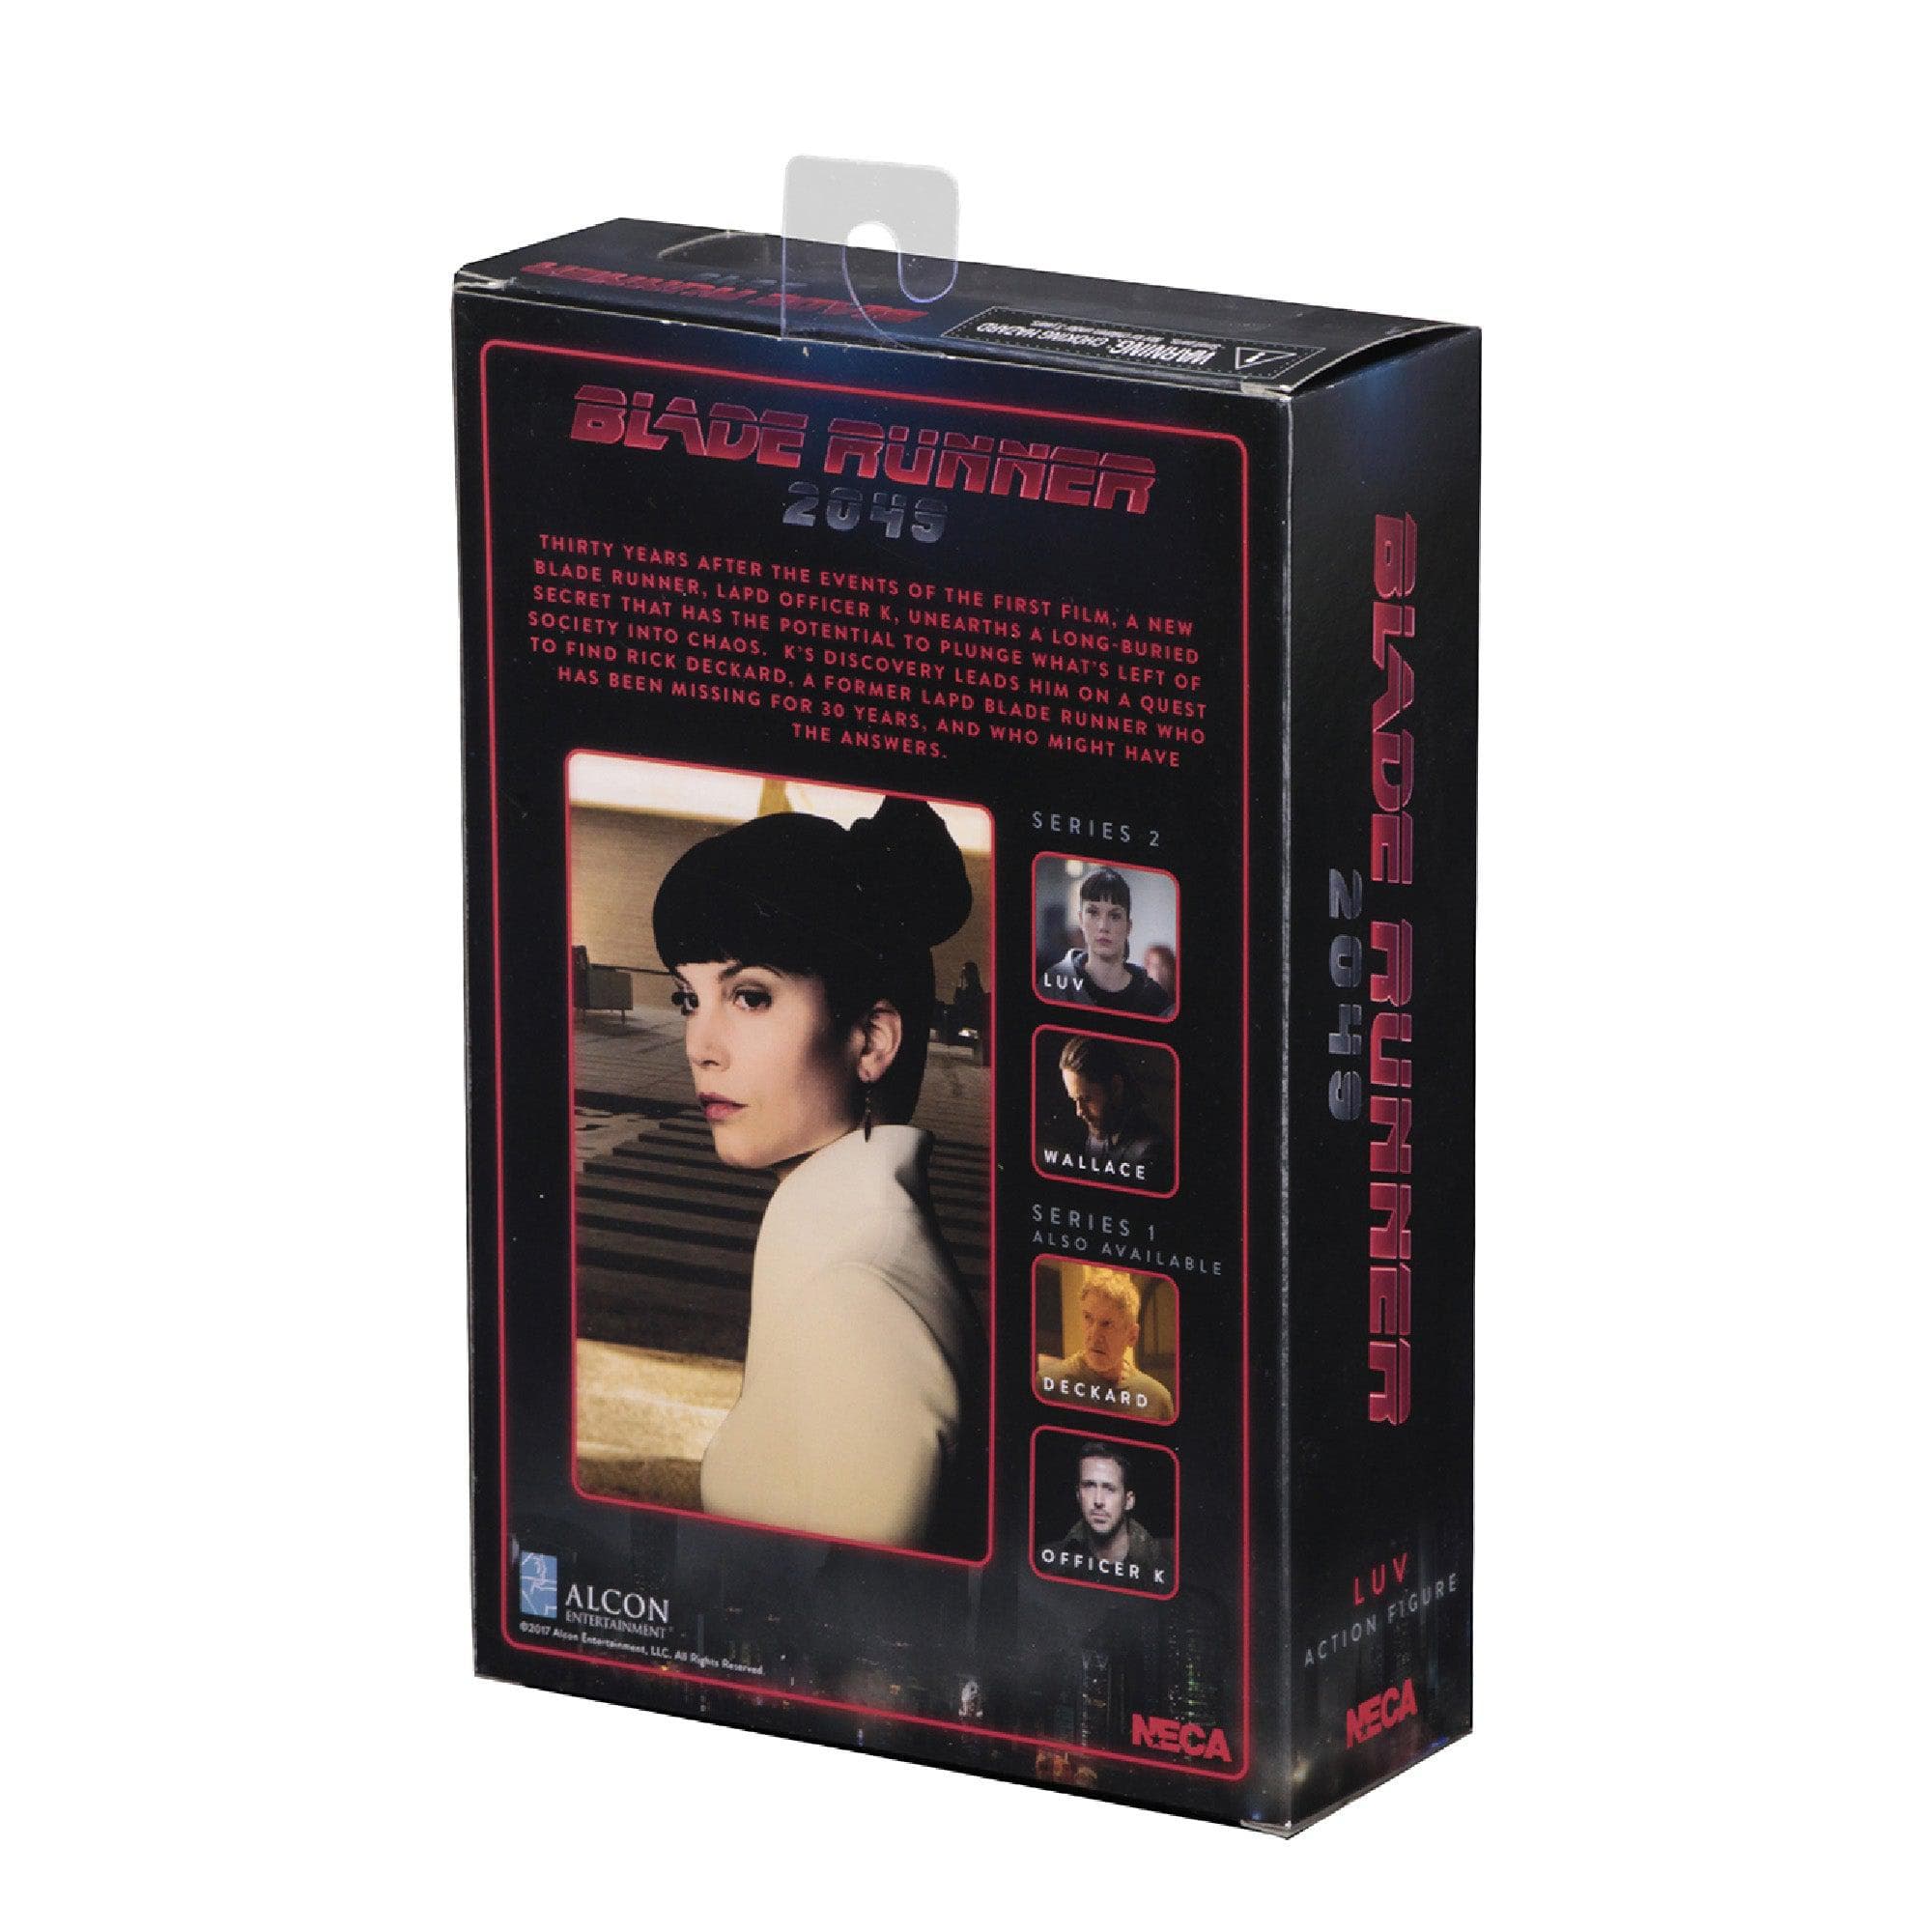 NECA - Blade Runner 2049 - 7" Scale Action Figure - Series 2 Luv - costumes.com